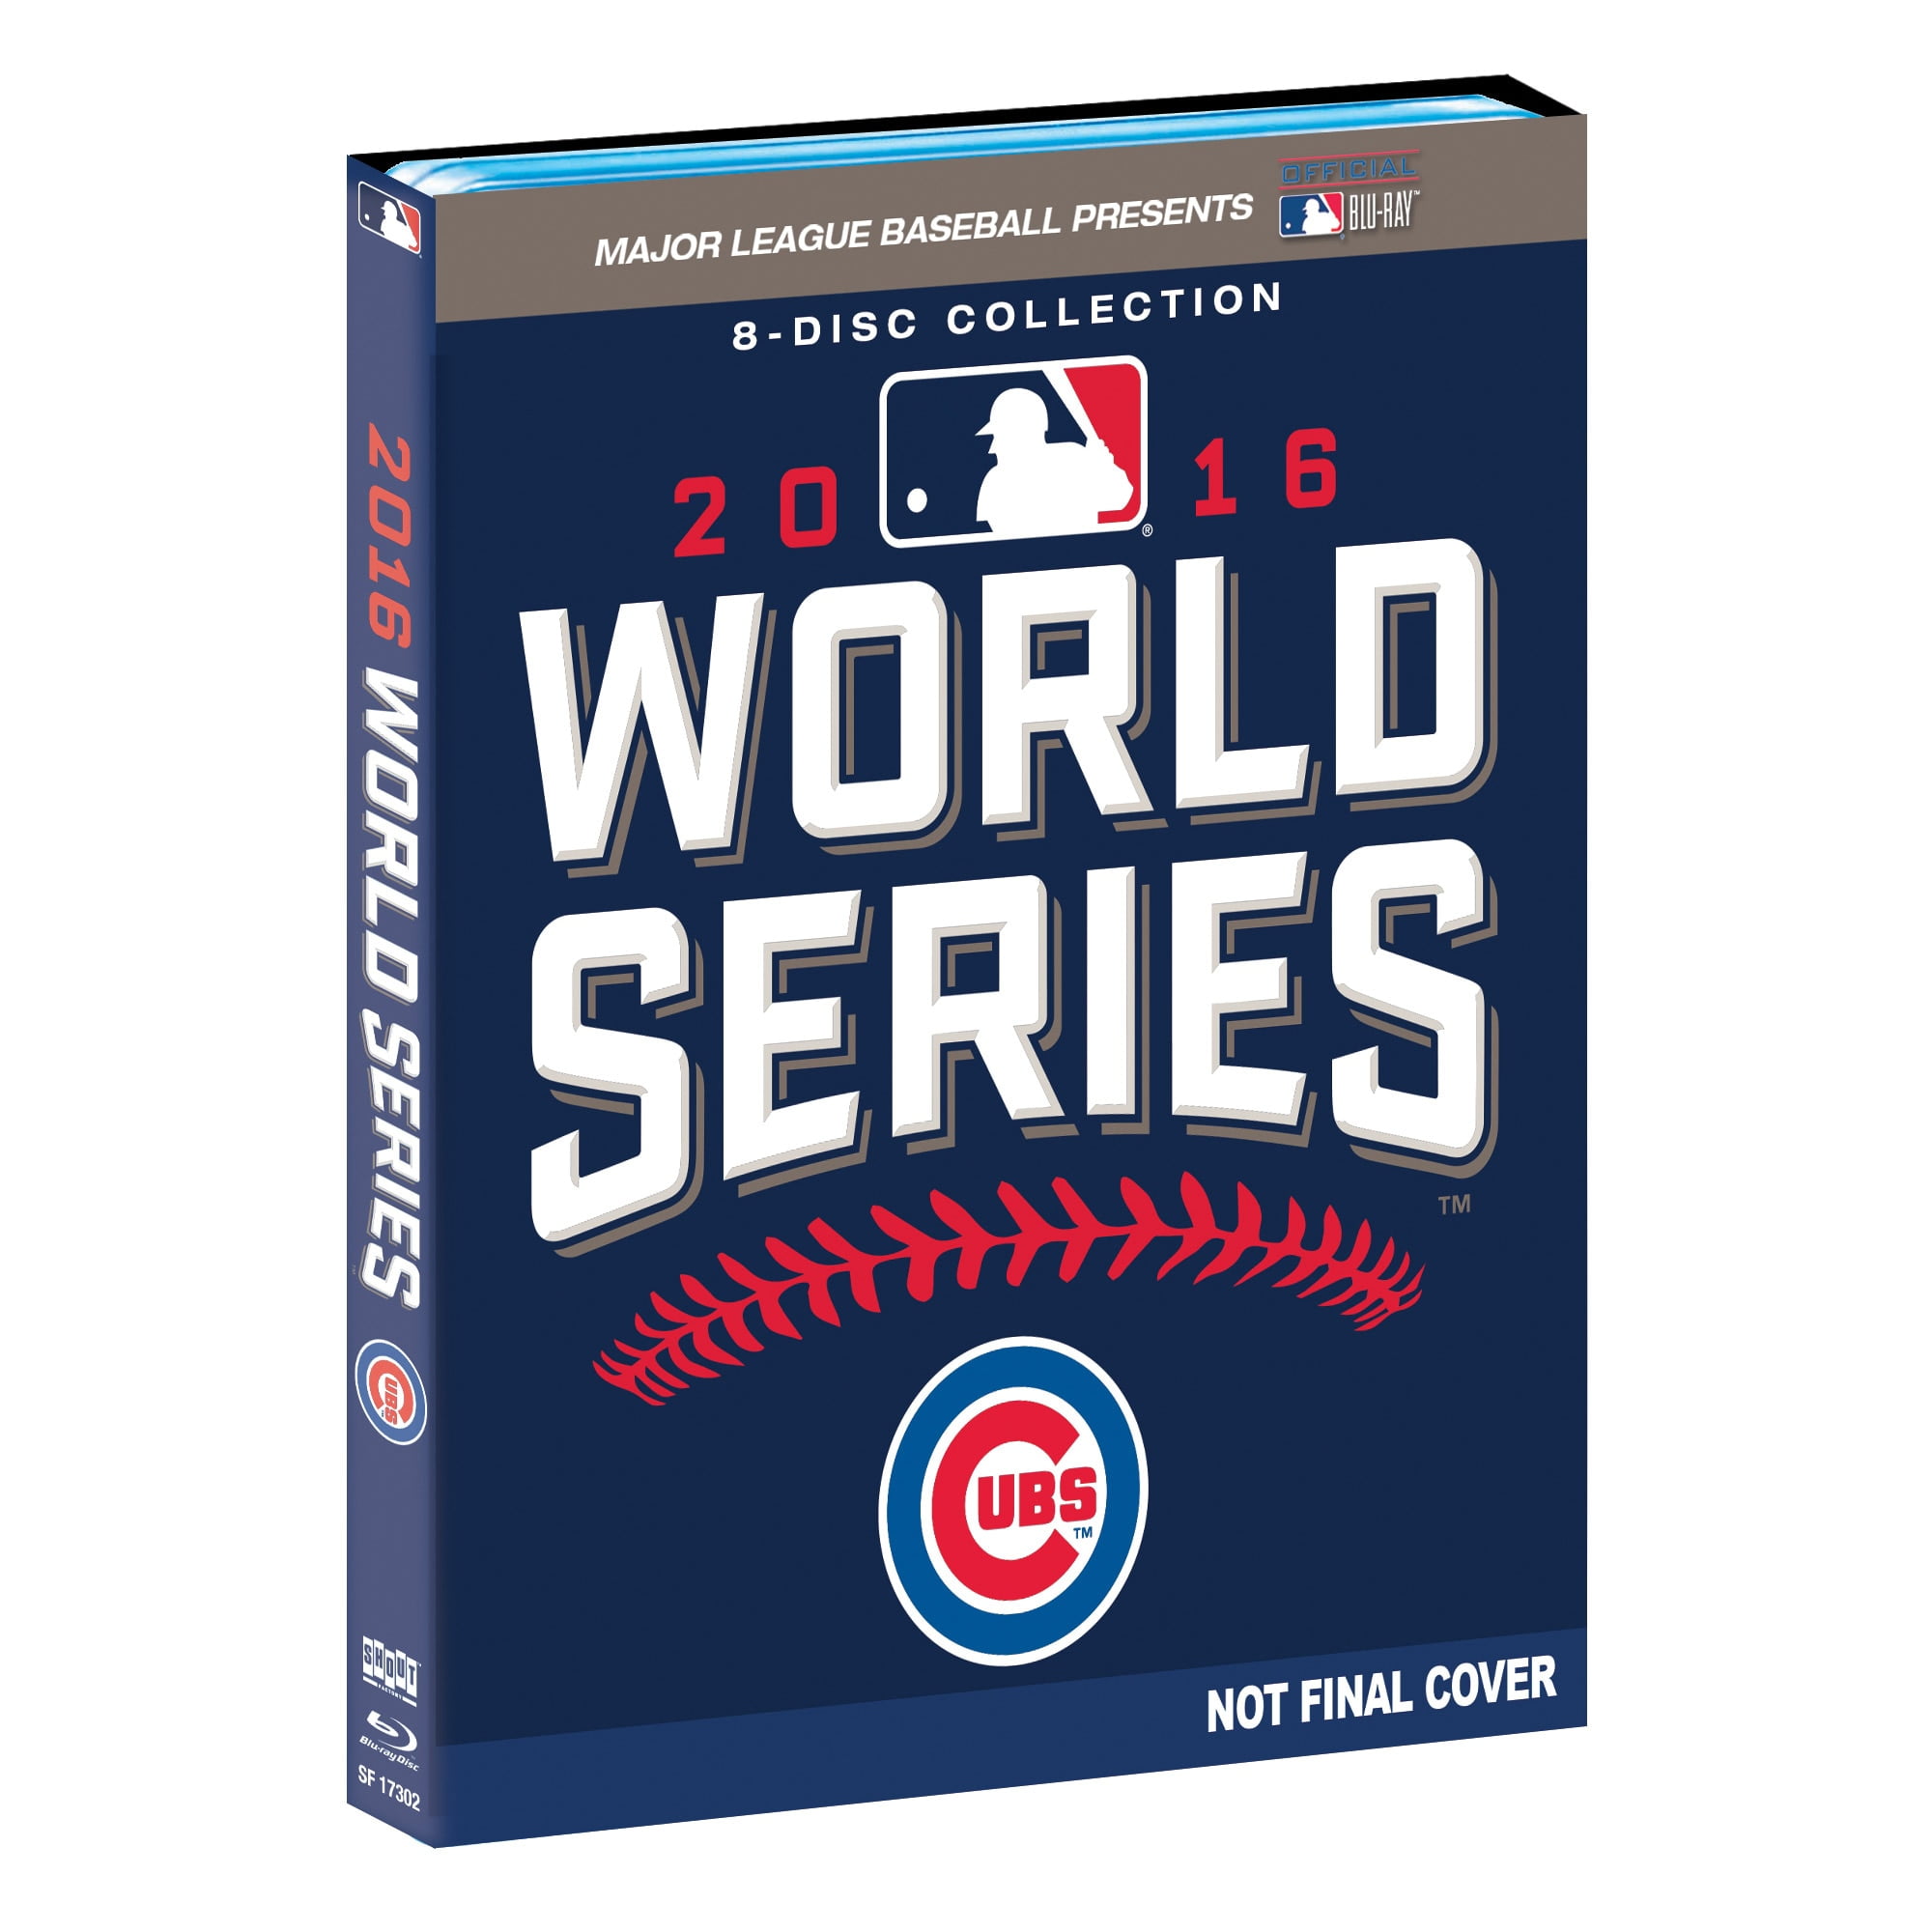 Chicago Cubs 2016 World Series Champions DVD